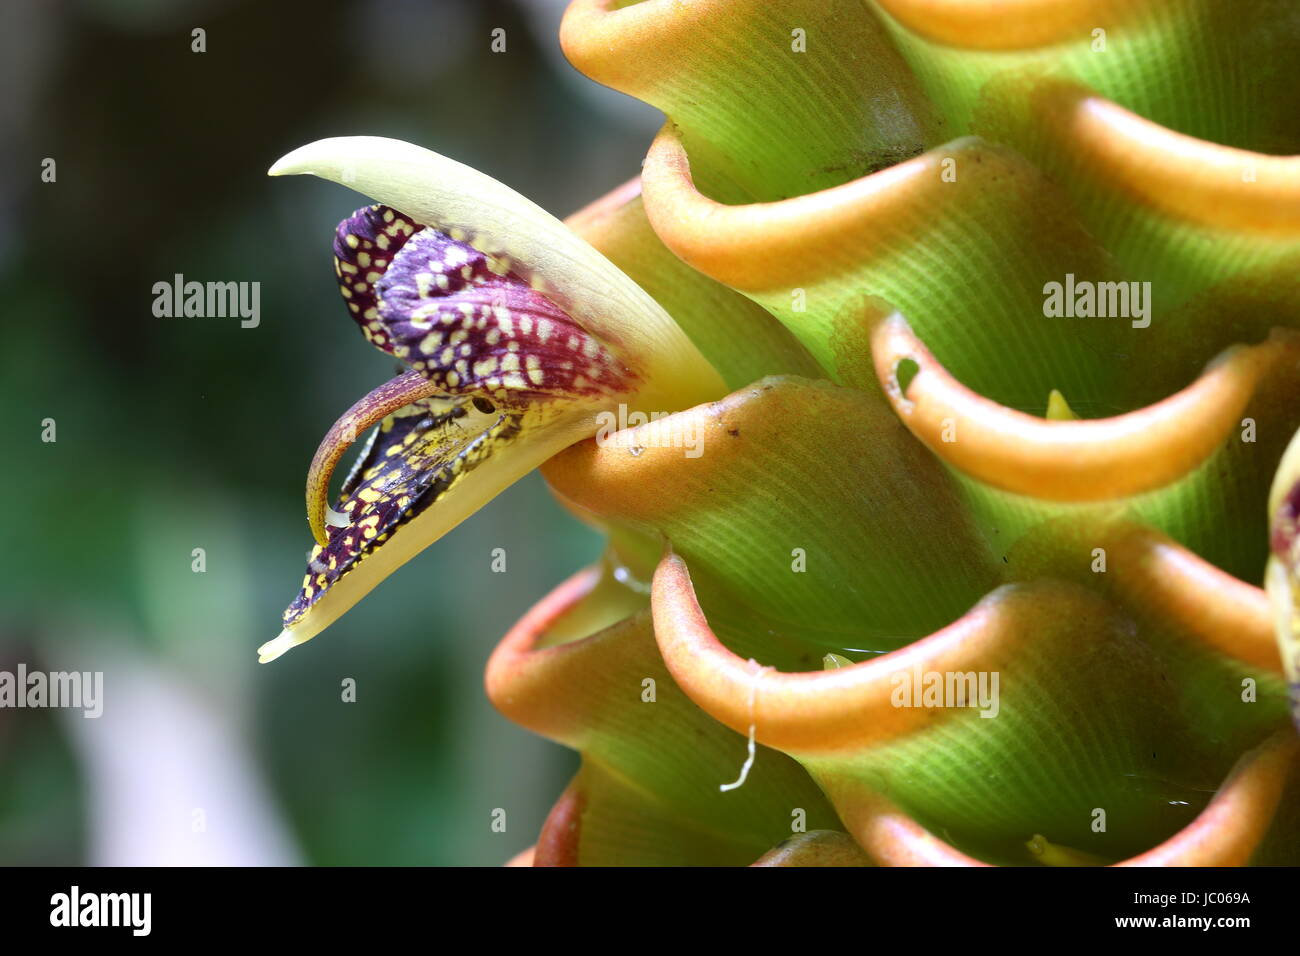 Close-up of the flower of the zingiber spectabile or Golden Beehive ginger found in the tropical jungle Stock Photo